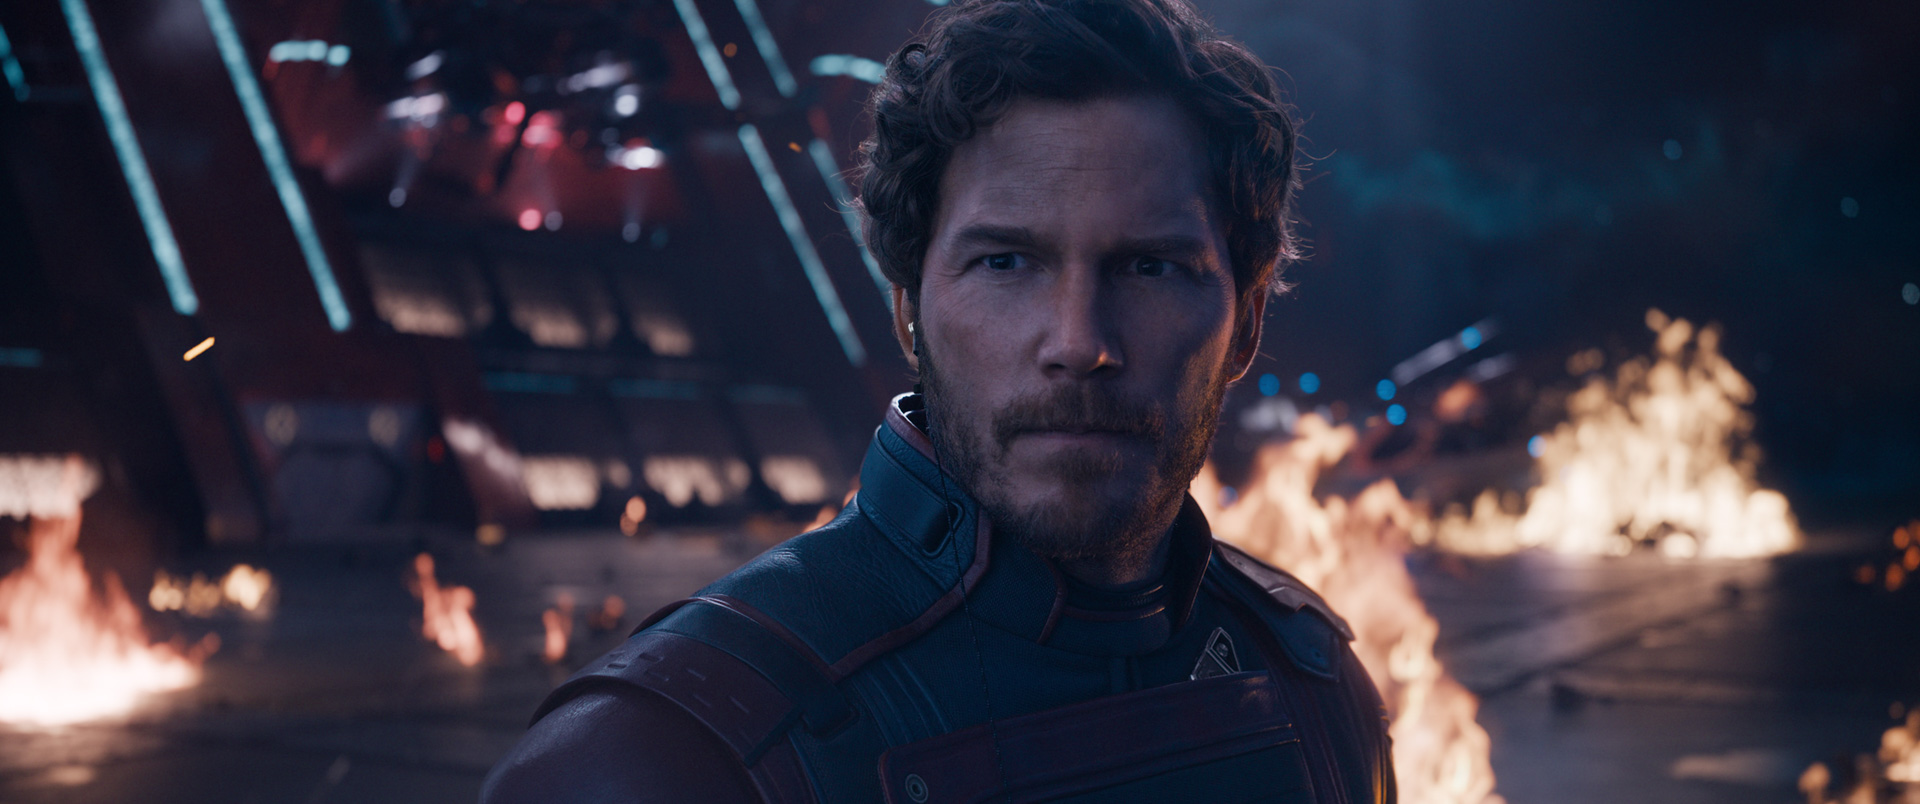 An image of Chris Pratt as Star-Lord in Guardians of the Galaxy Vol. 3. He stares ahead with a serious expression as areas of the spaceship he stands in catch fire.